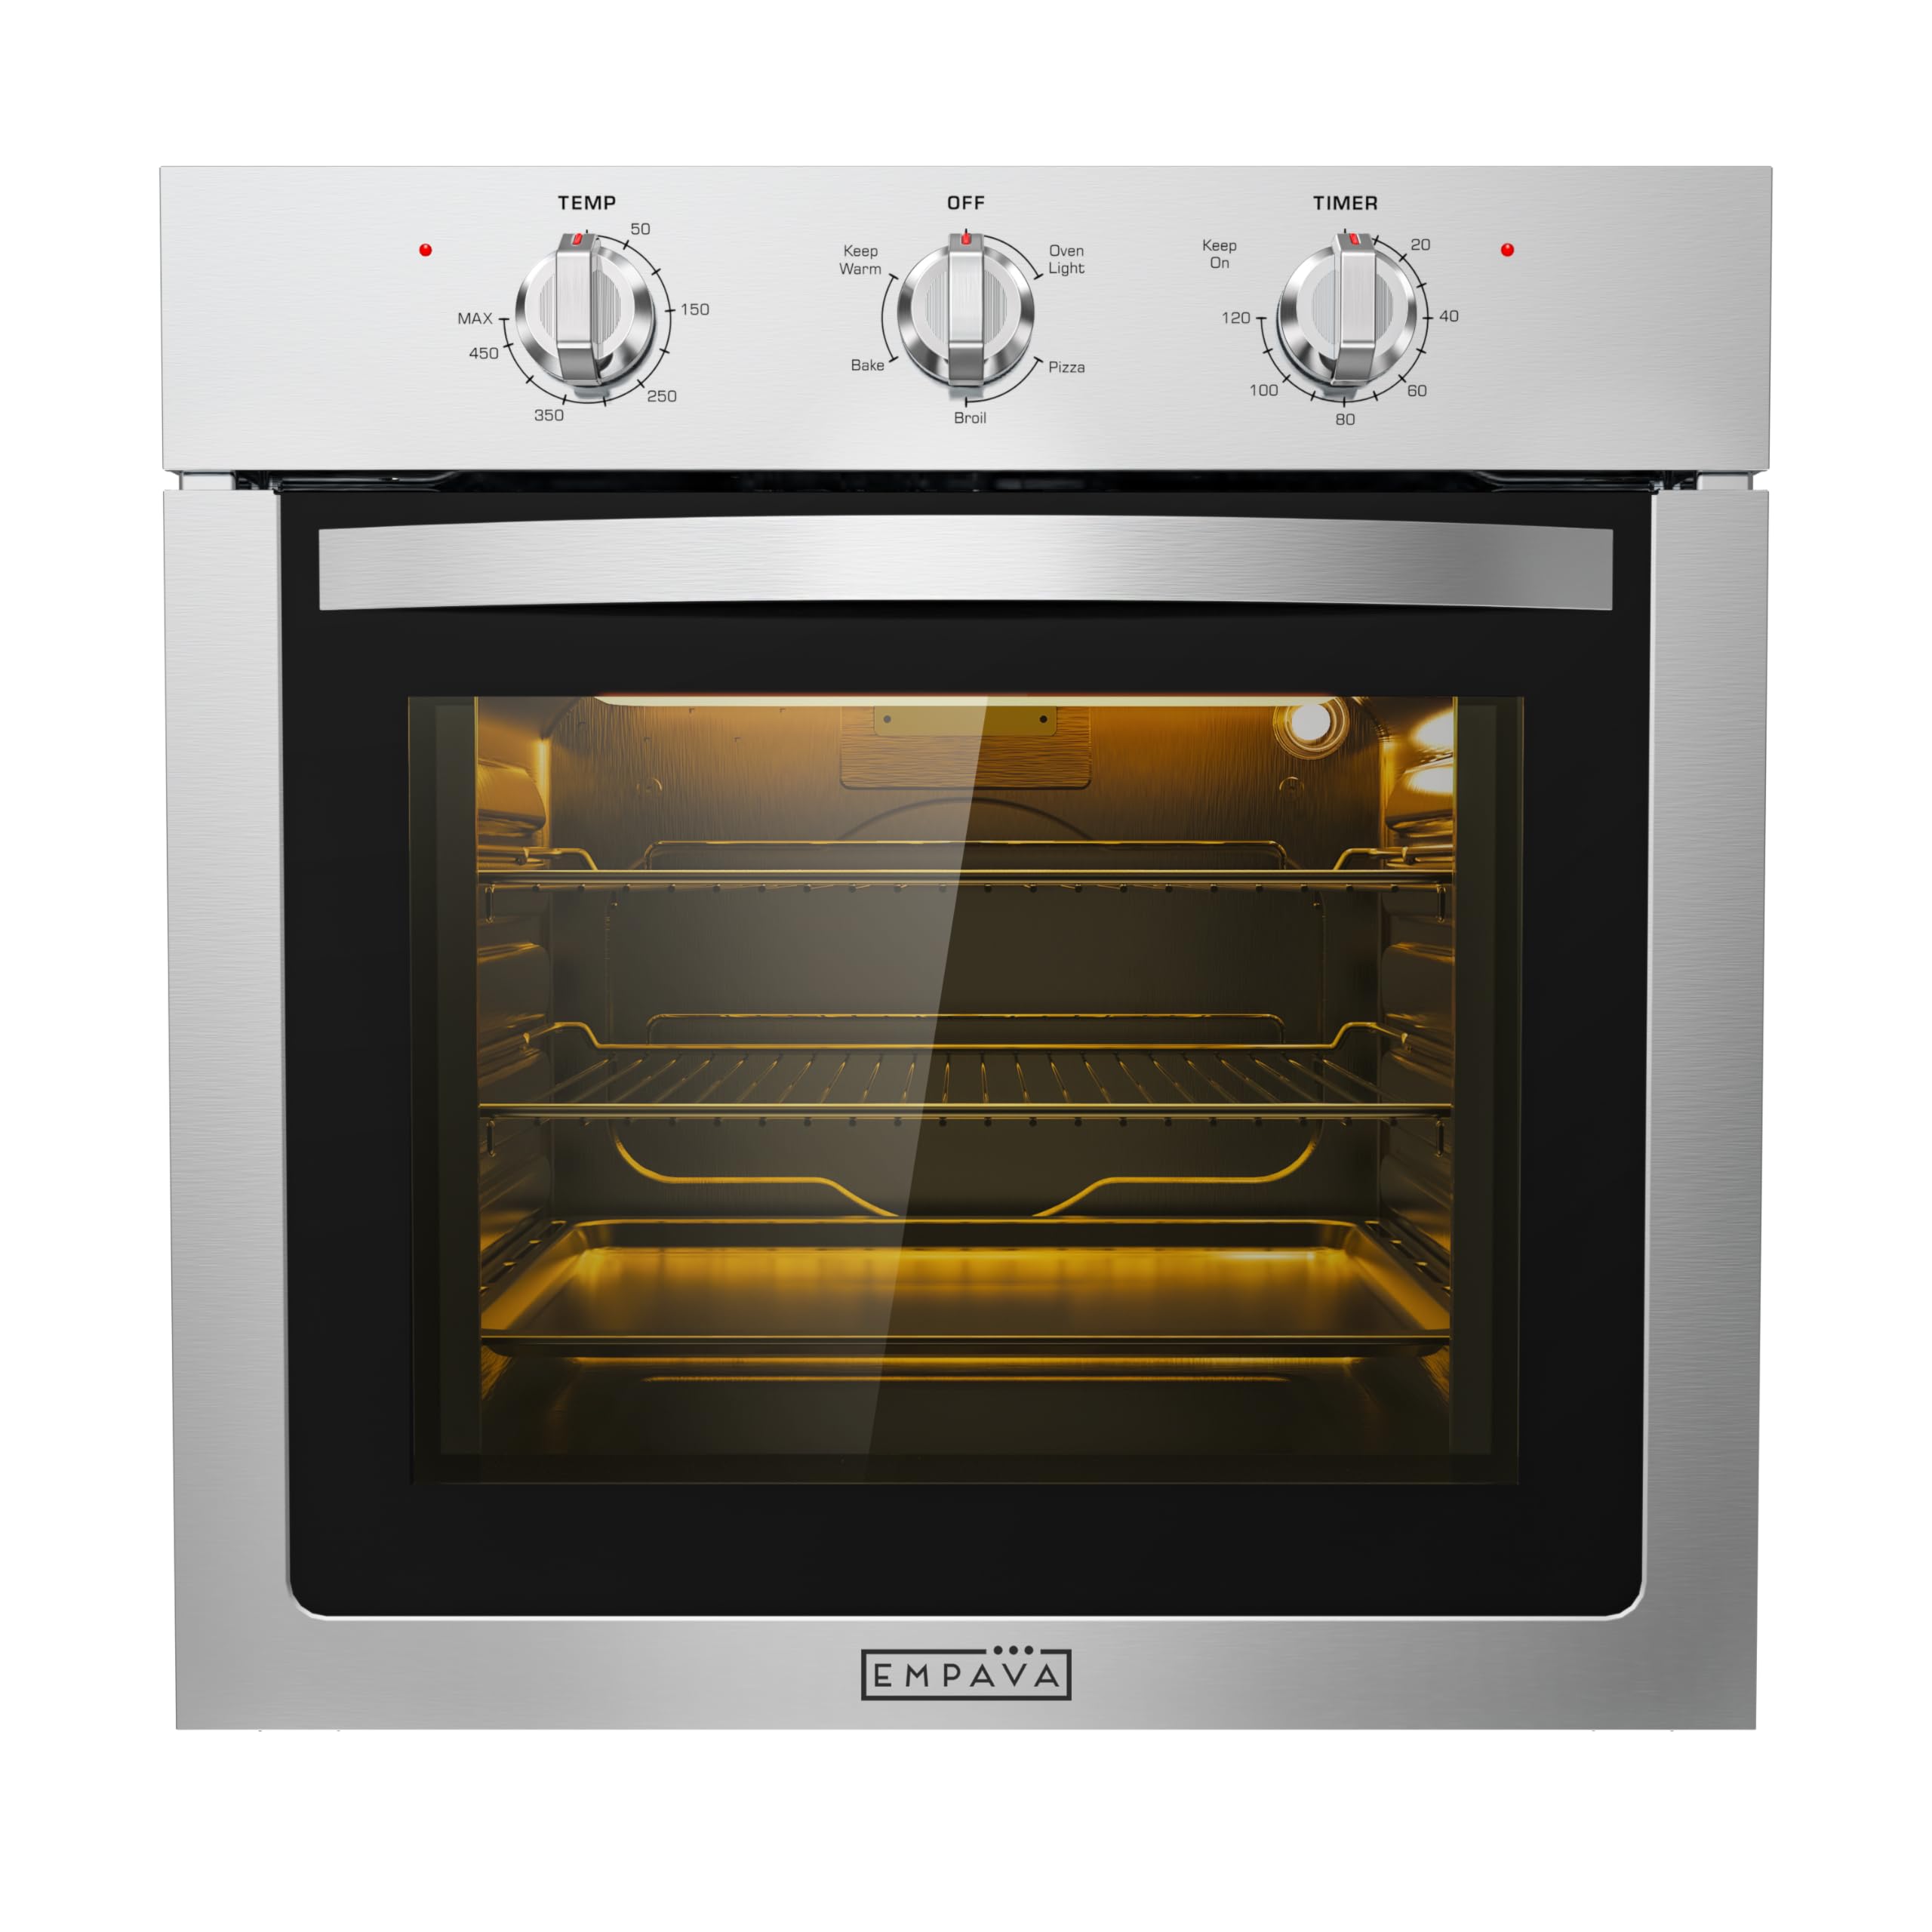 Empava 24 inch Electric Single Wall Oven 2.5 Cu.ft Stainless Steel with Basic Broil Bake Functions Mechanical Knobs Control, 24WOE40L, Silver